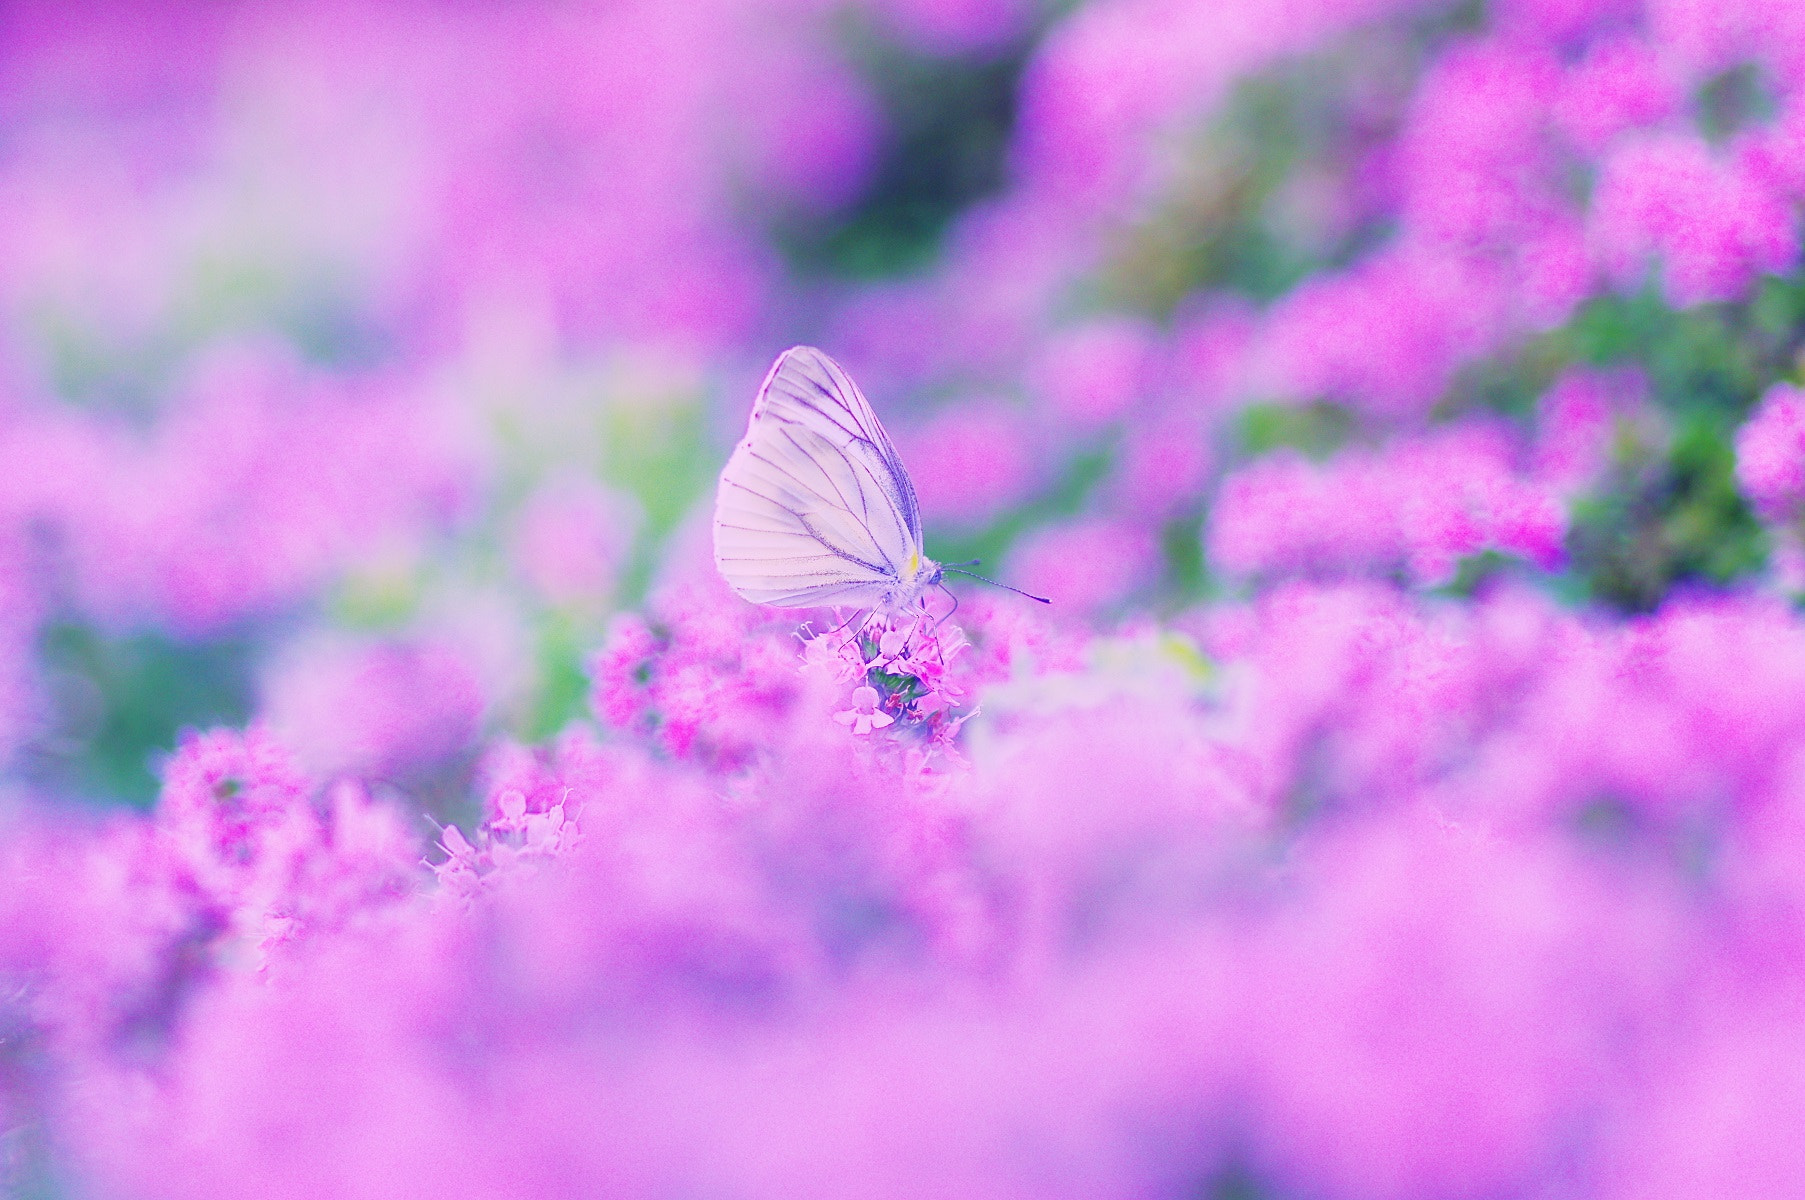 Pentax K-3 II sample photo. A cabbage butterfly photography